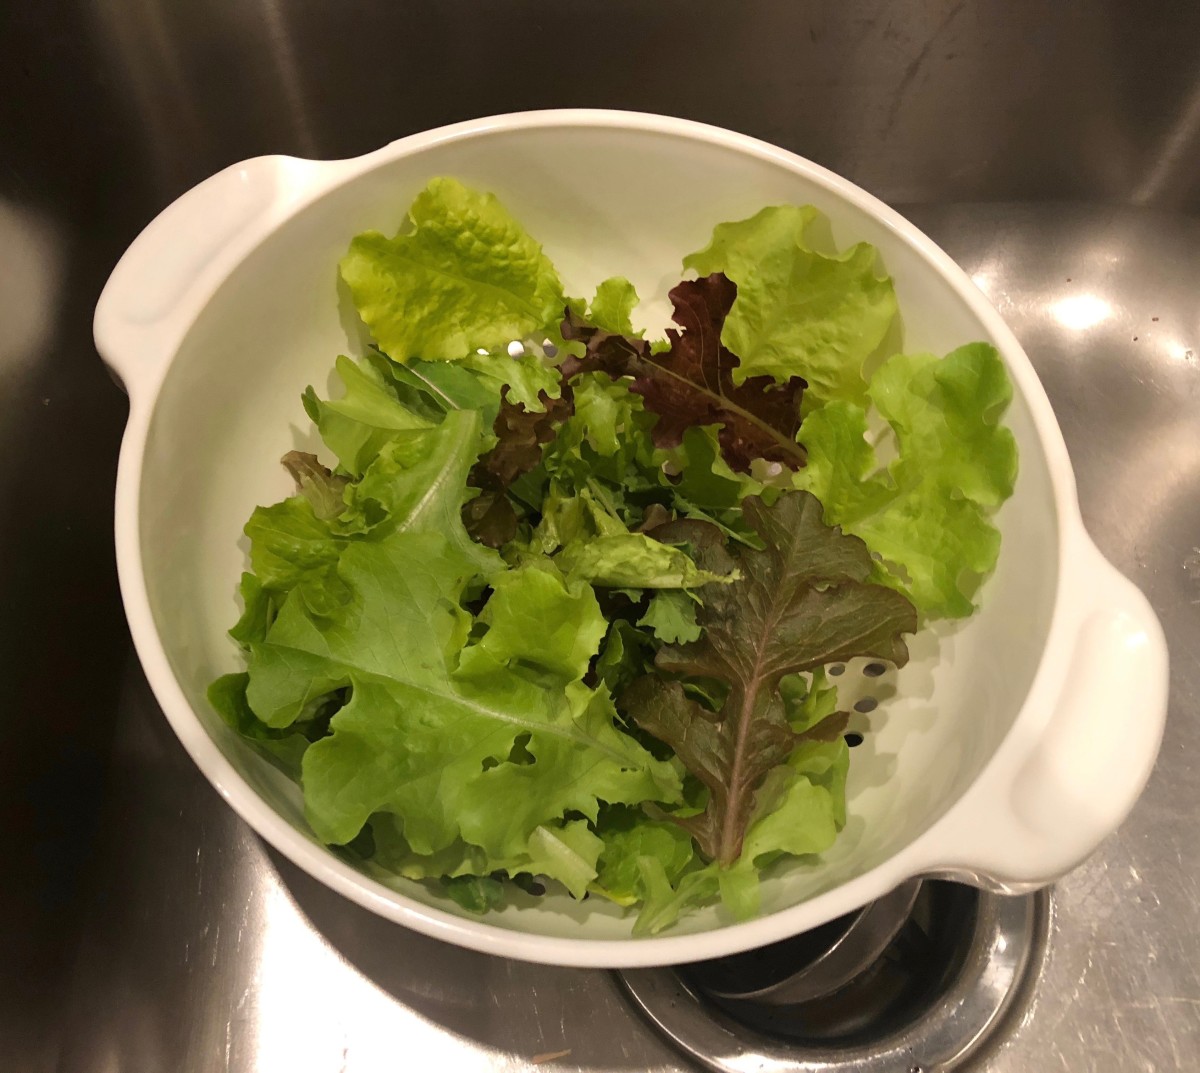 Lettuces are one of my favorite things to grow in late autumn, winter, and spring. The cooler weather is perfect for growing the delicious greens.